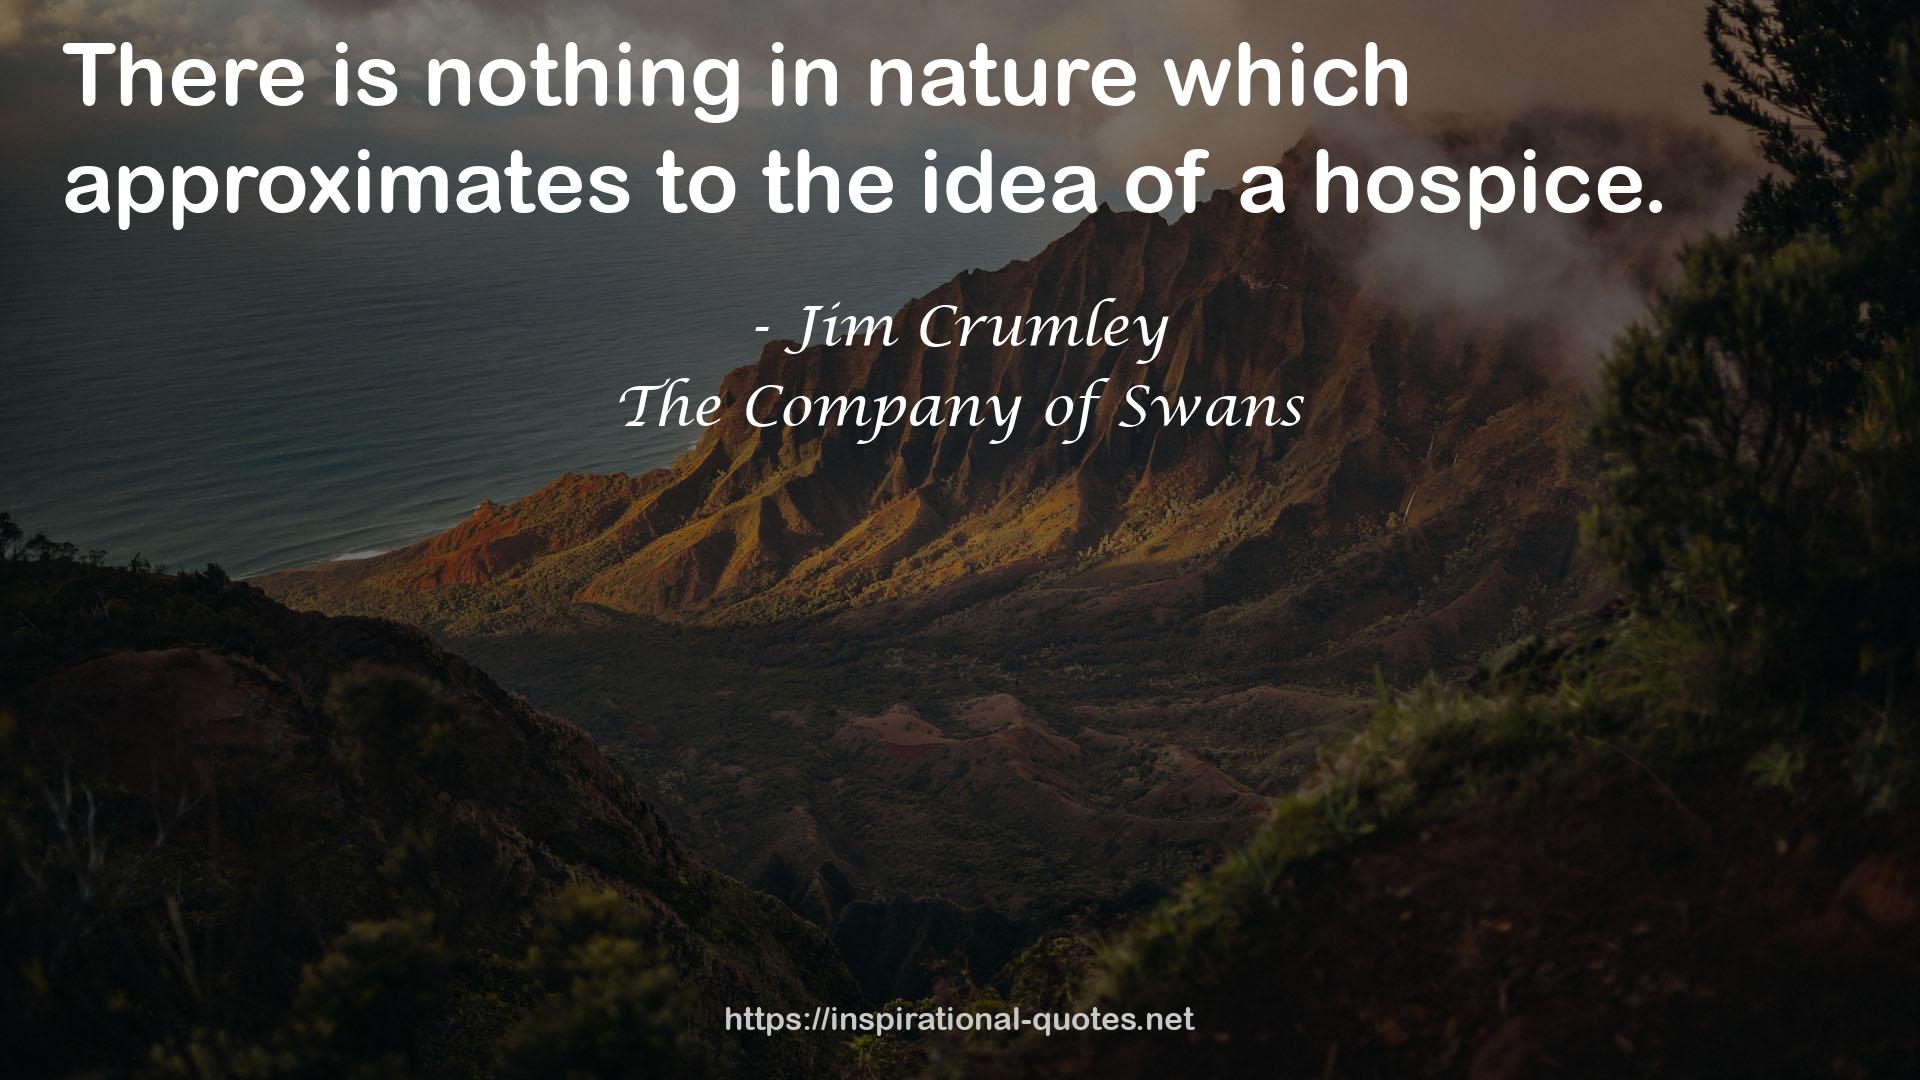 The Company of Swans QUOTES